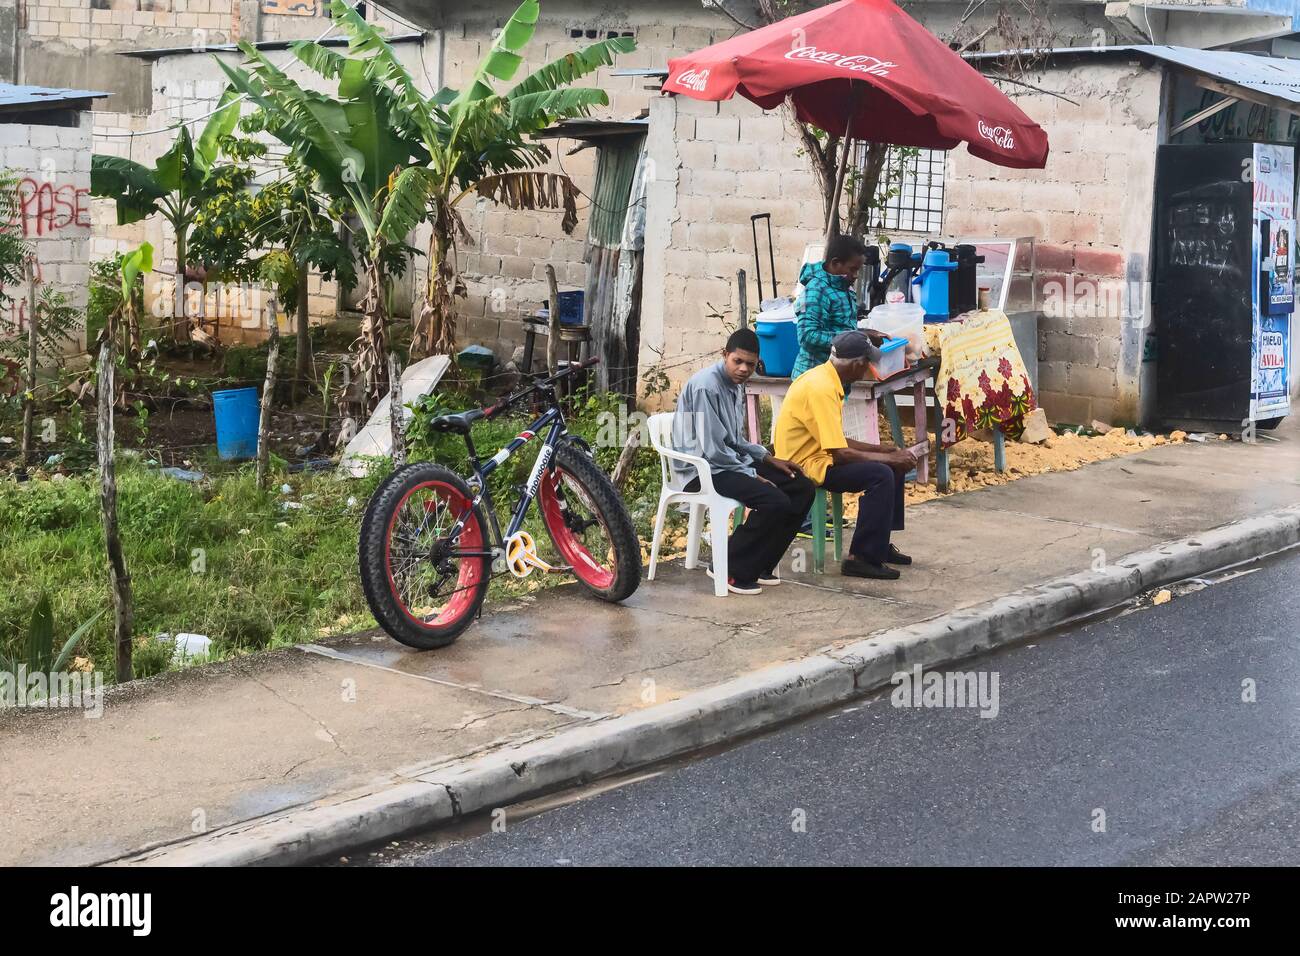 Three people on the street waiting for transport , Dominican Republic Stock Photo